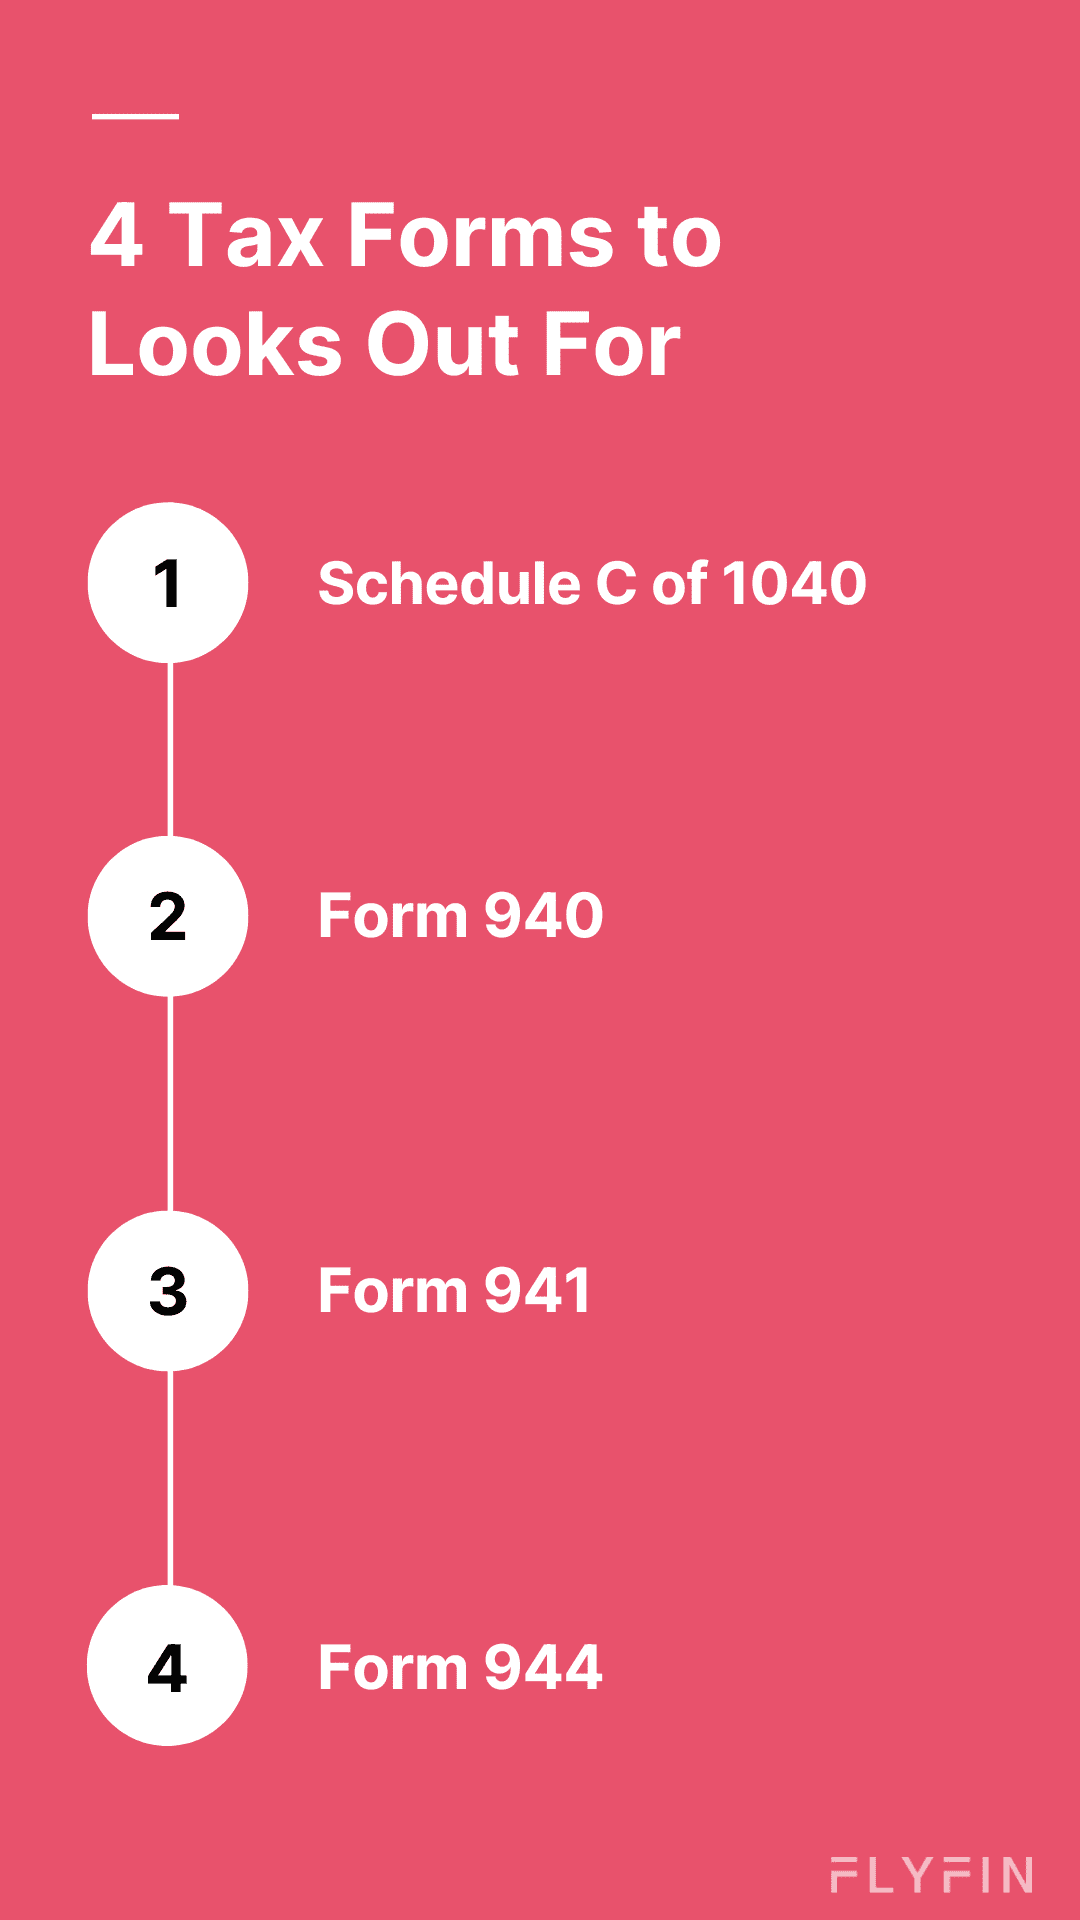 Image listing 4 important tax forms to watch out for - Schedule, C of 1040, Form 940, Form 941, and Form 944. Relevant for self-employed, freelancers, and those filing taxes with 1099 income.